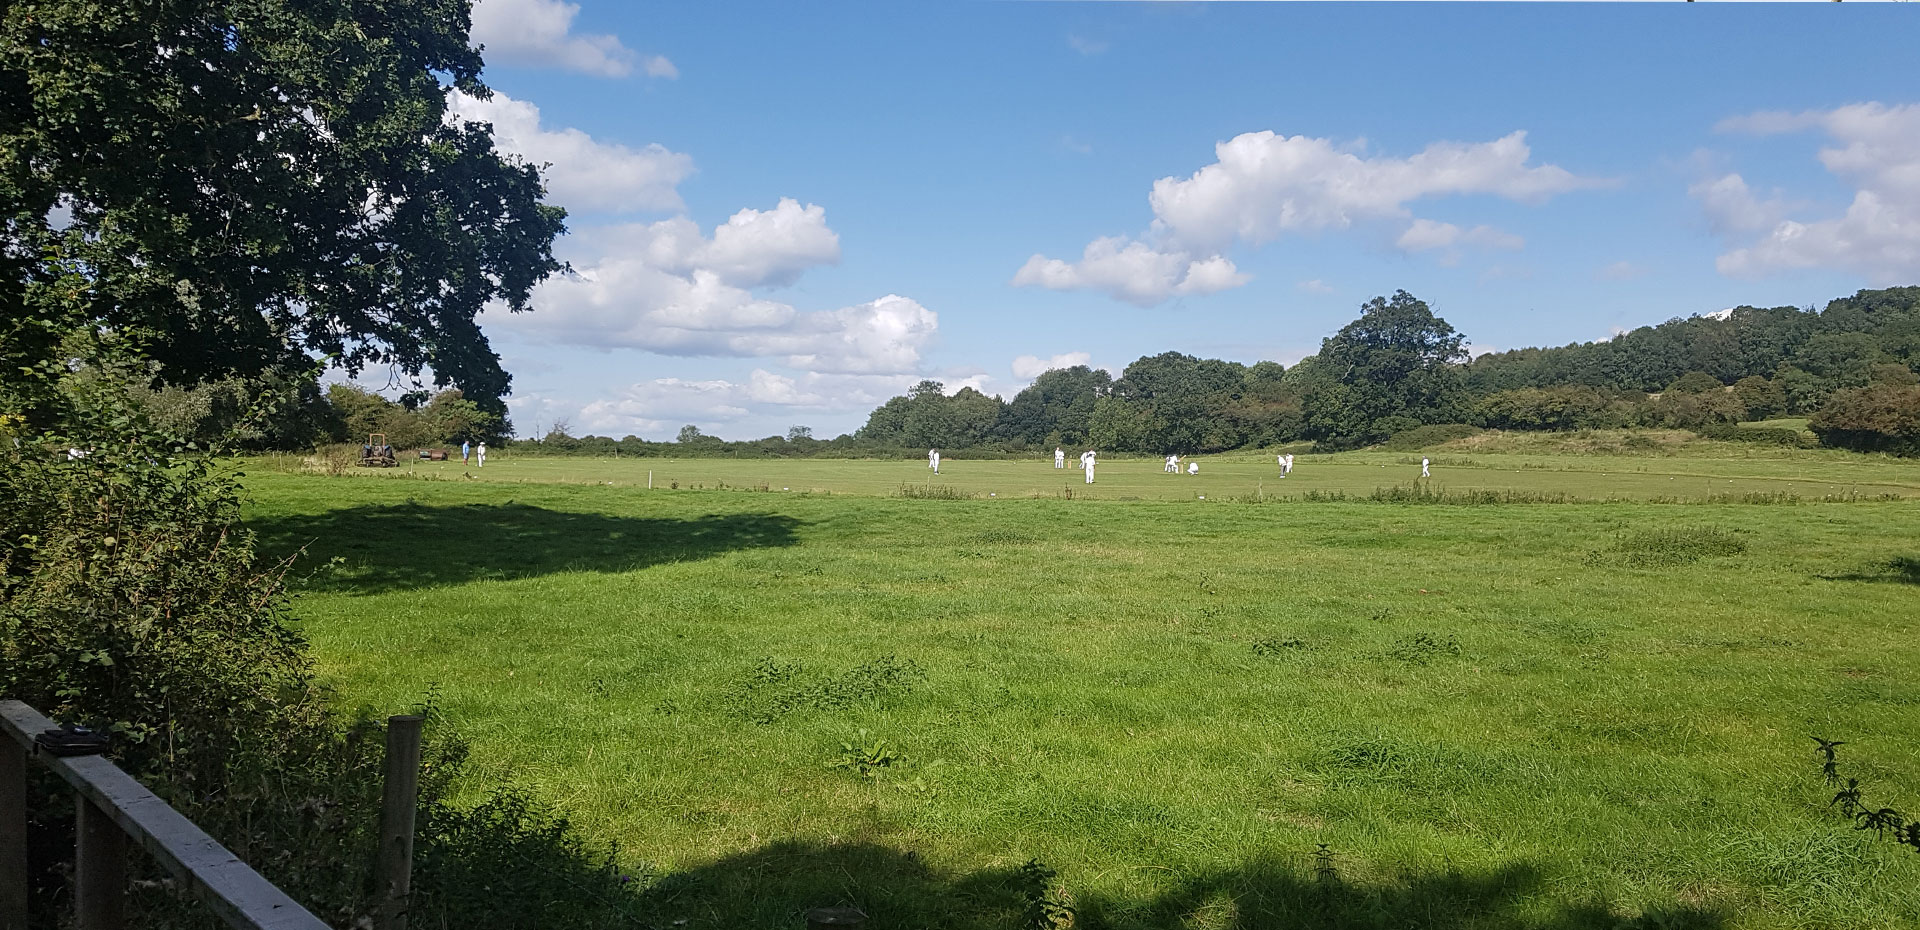 Image of pastoral scene of village cricket match on pitch in field with nettles marking the pitch edges